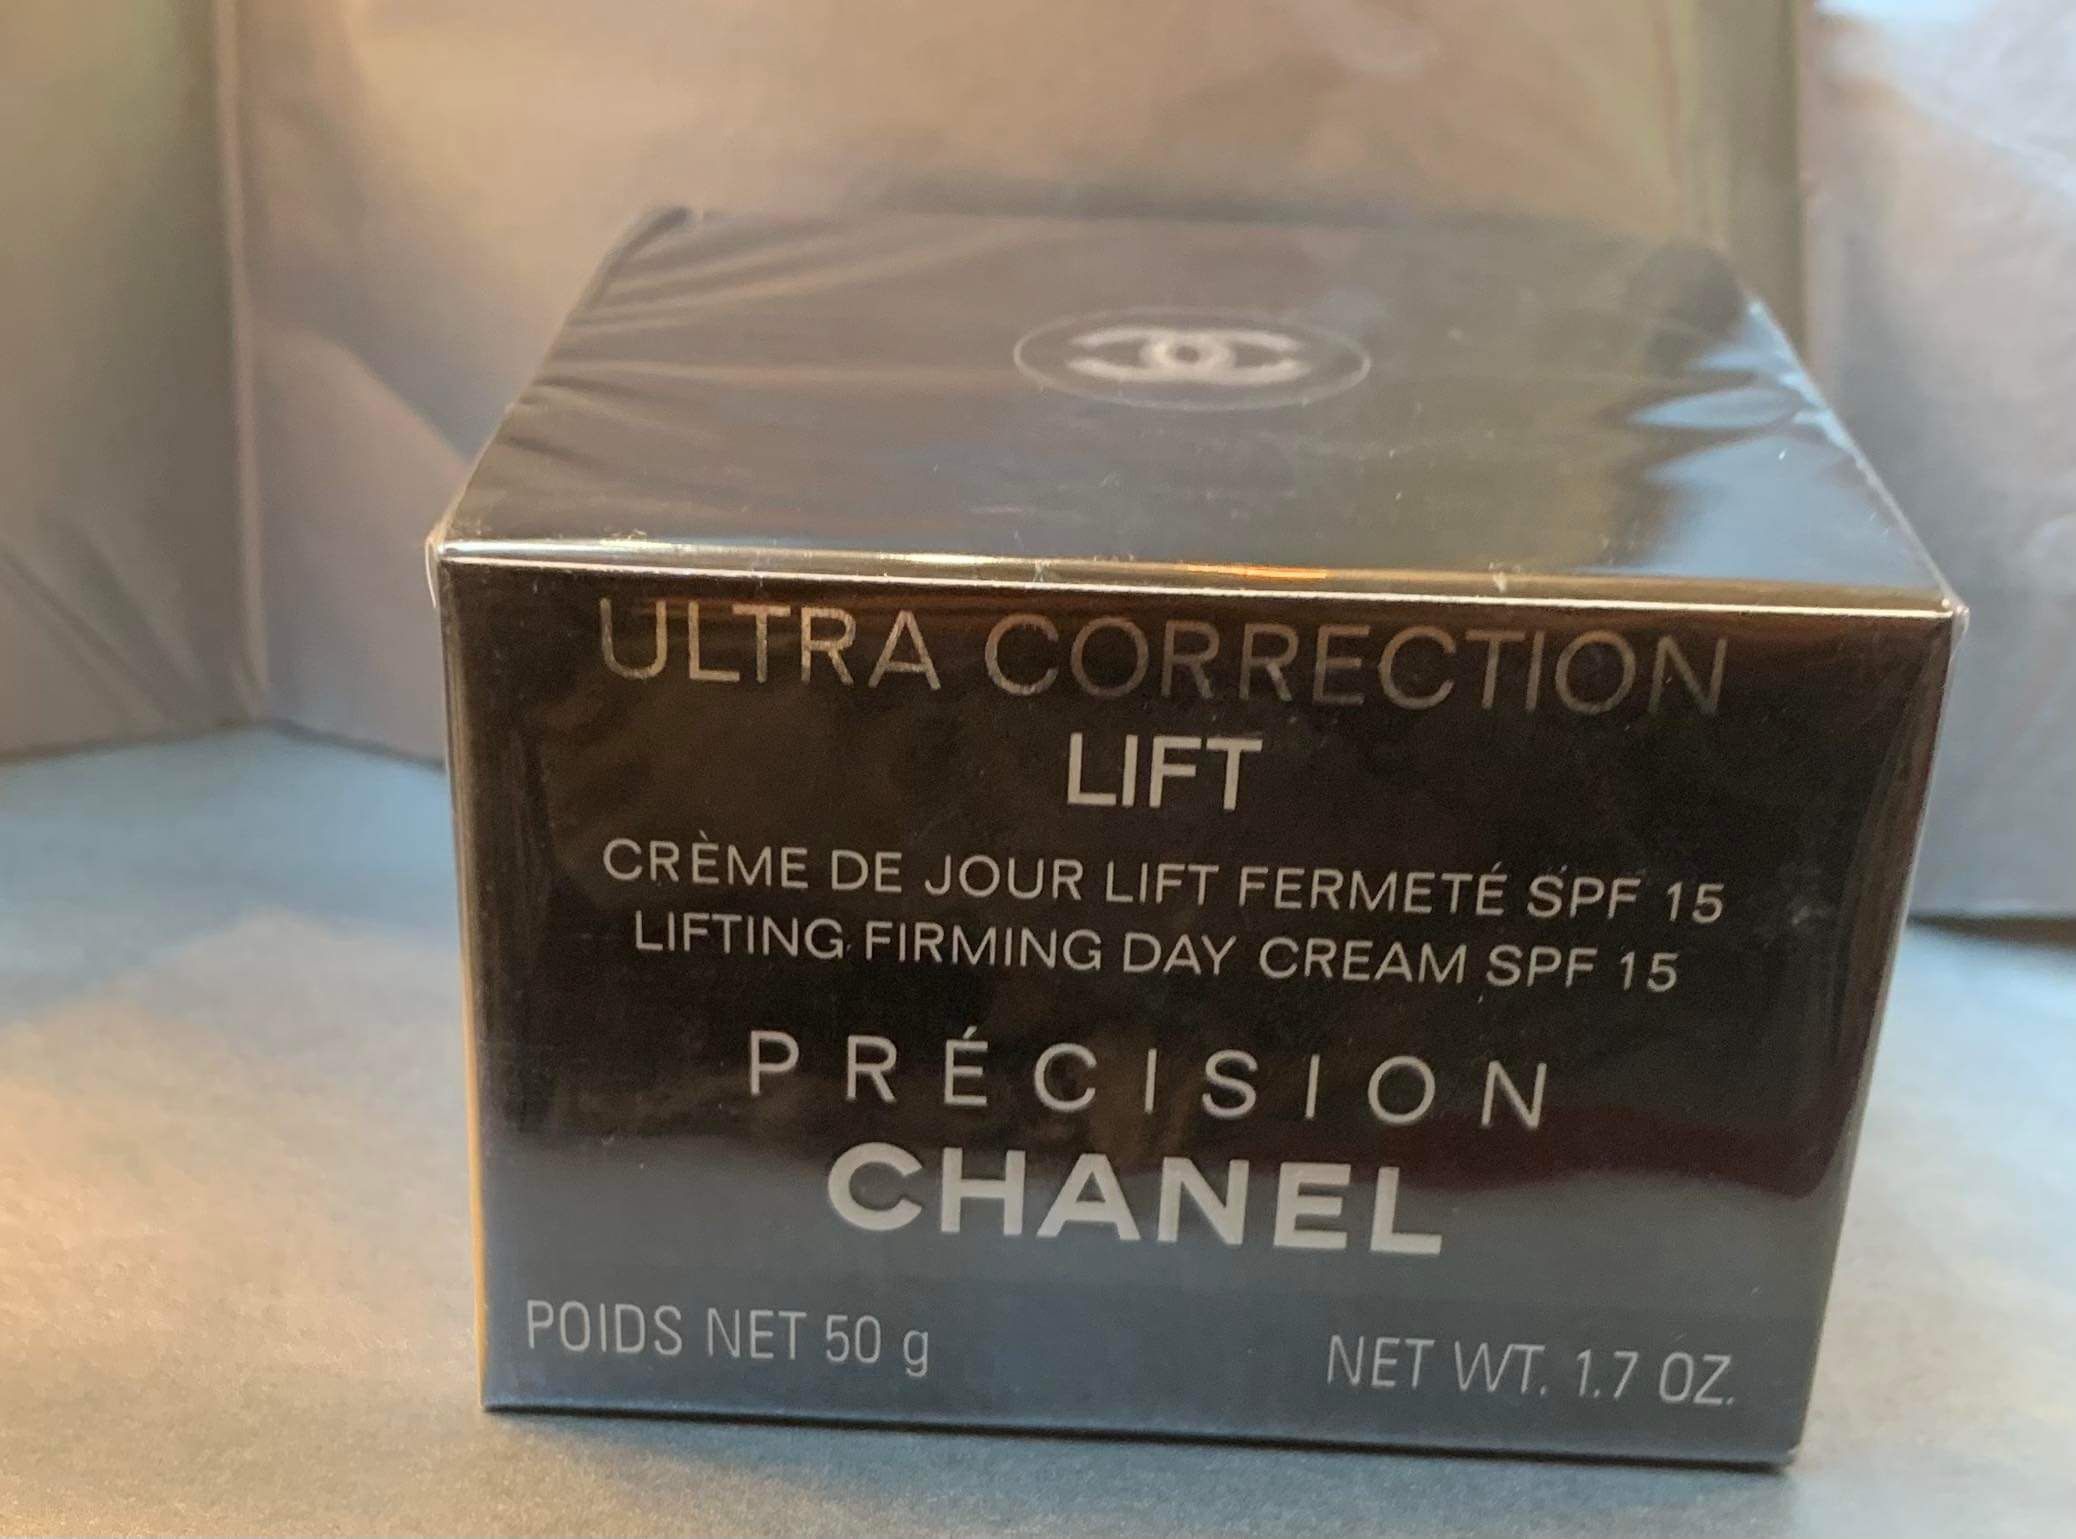 Chanel Ultra Correction Lift Travel Essentials Set - Update - The